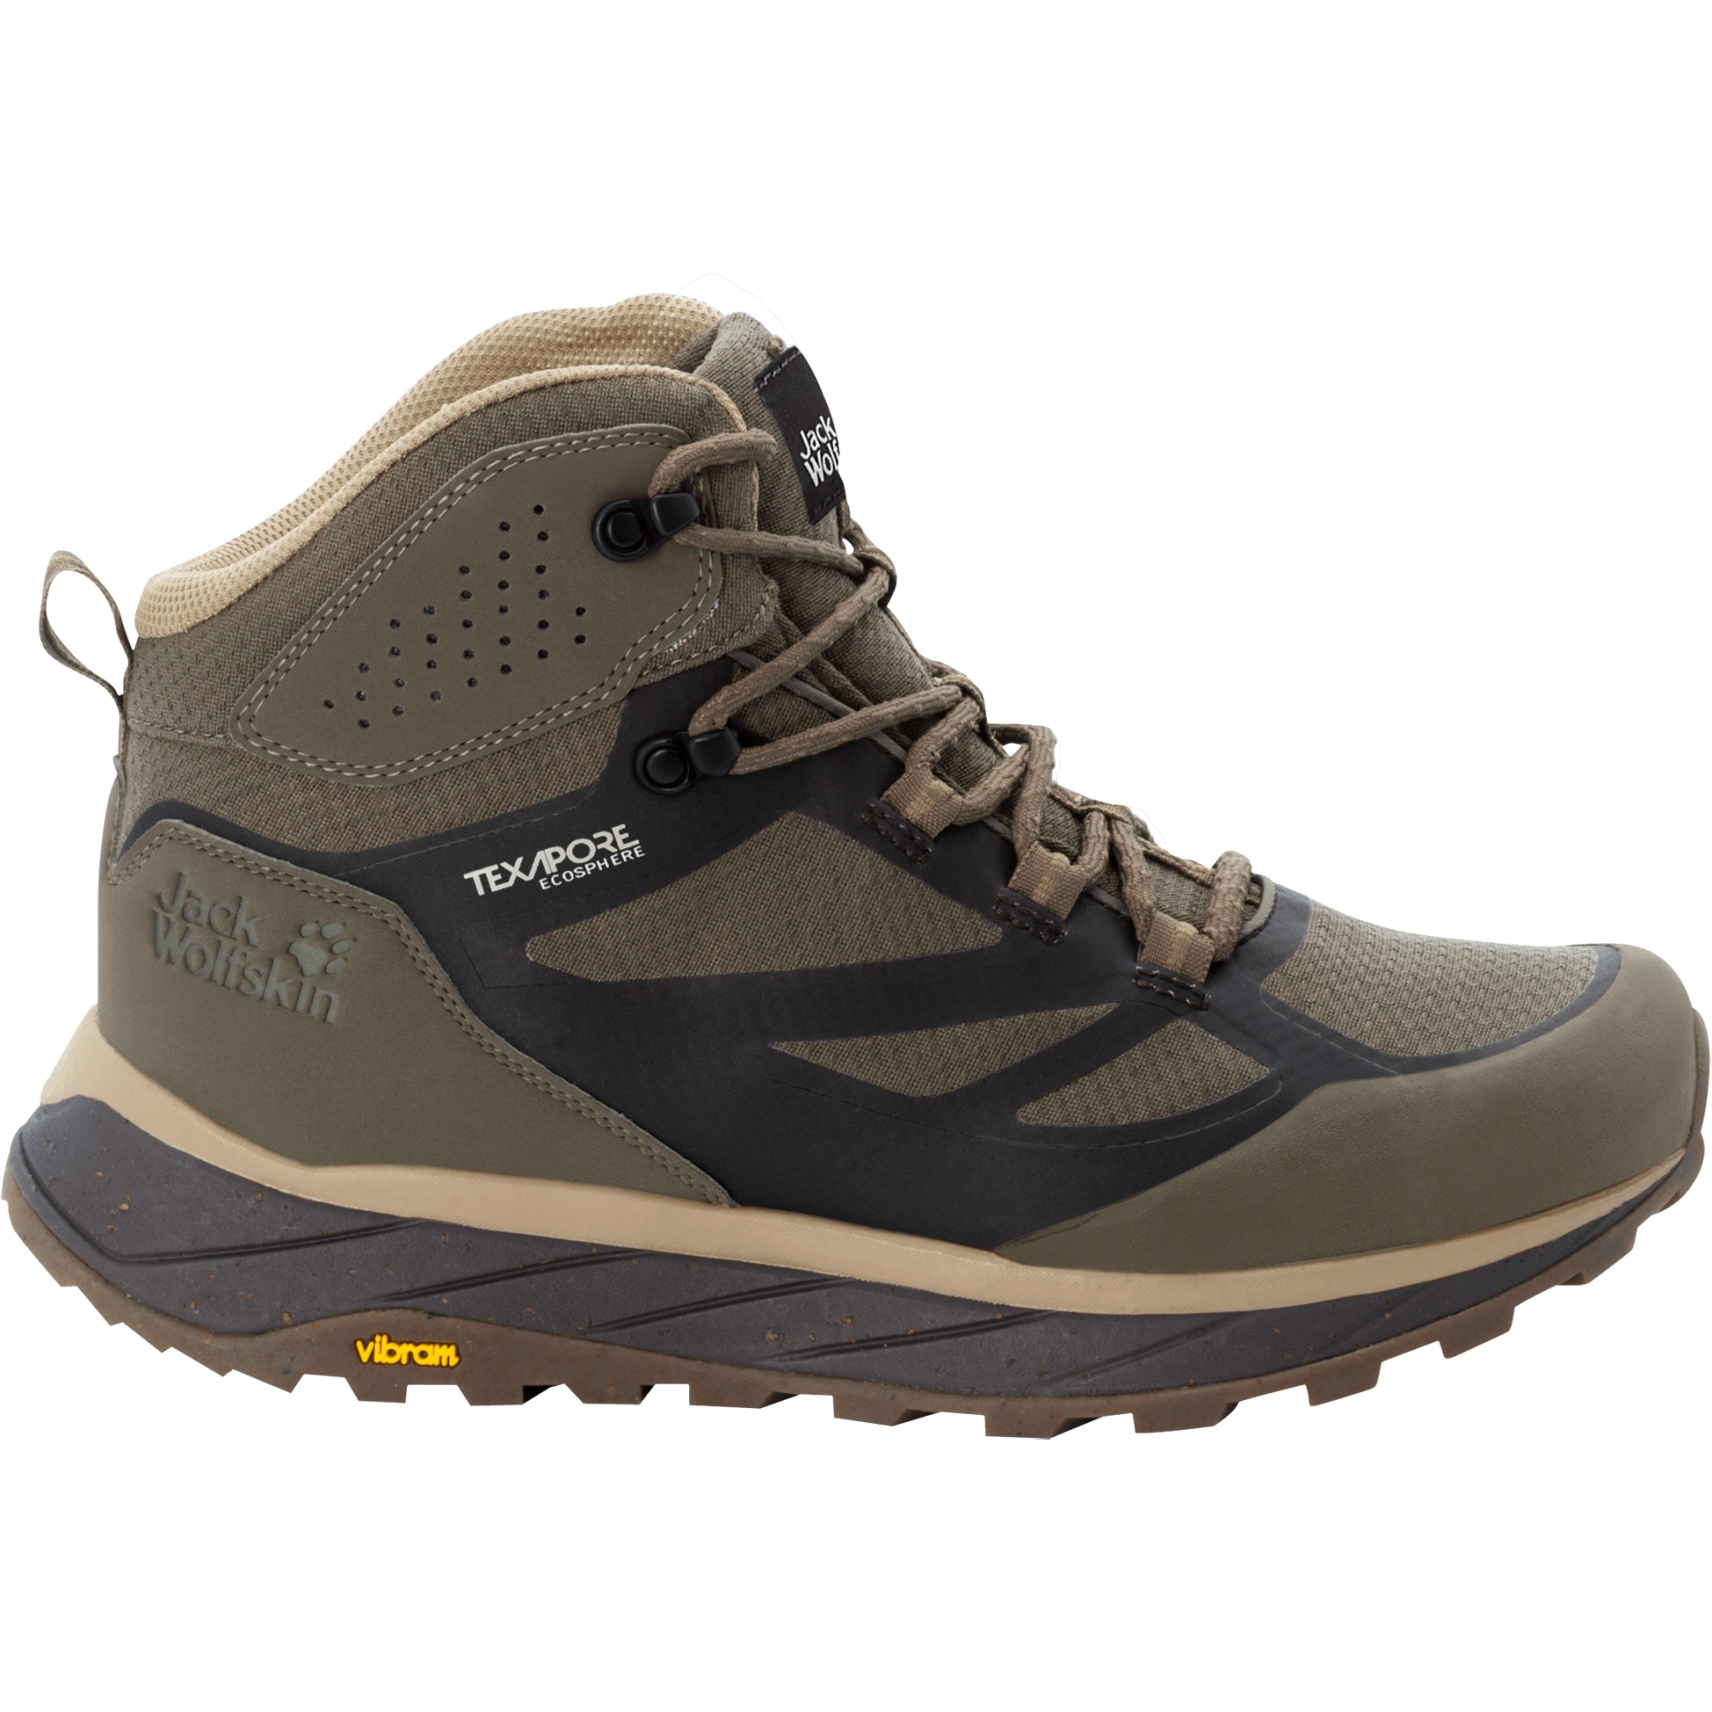 Jack Wolfskin's Terraventure Texapore Hiking Boots: Small Footprint, Big  Strides in Footwear Performance